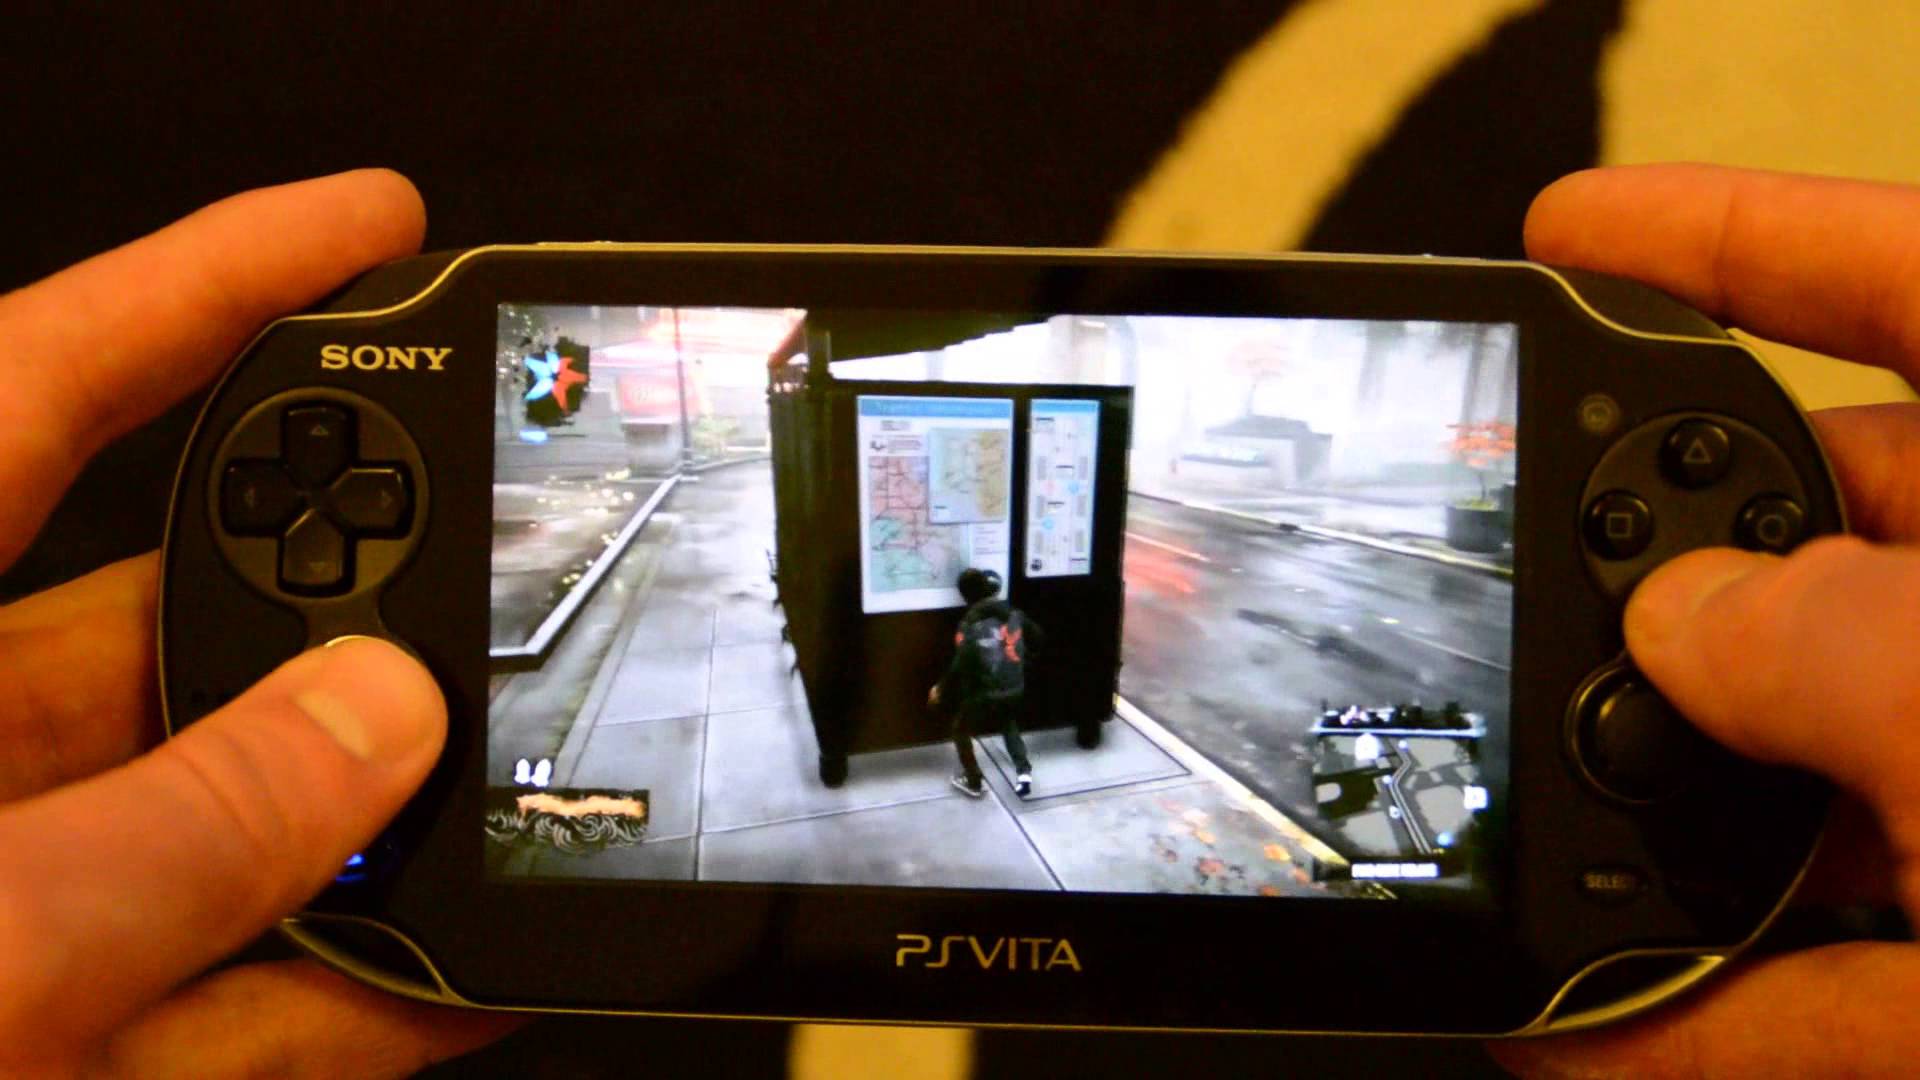 Infamous second Son On Ps Vita